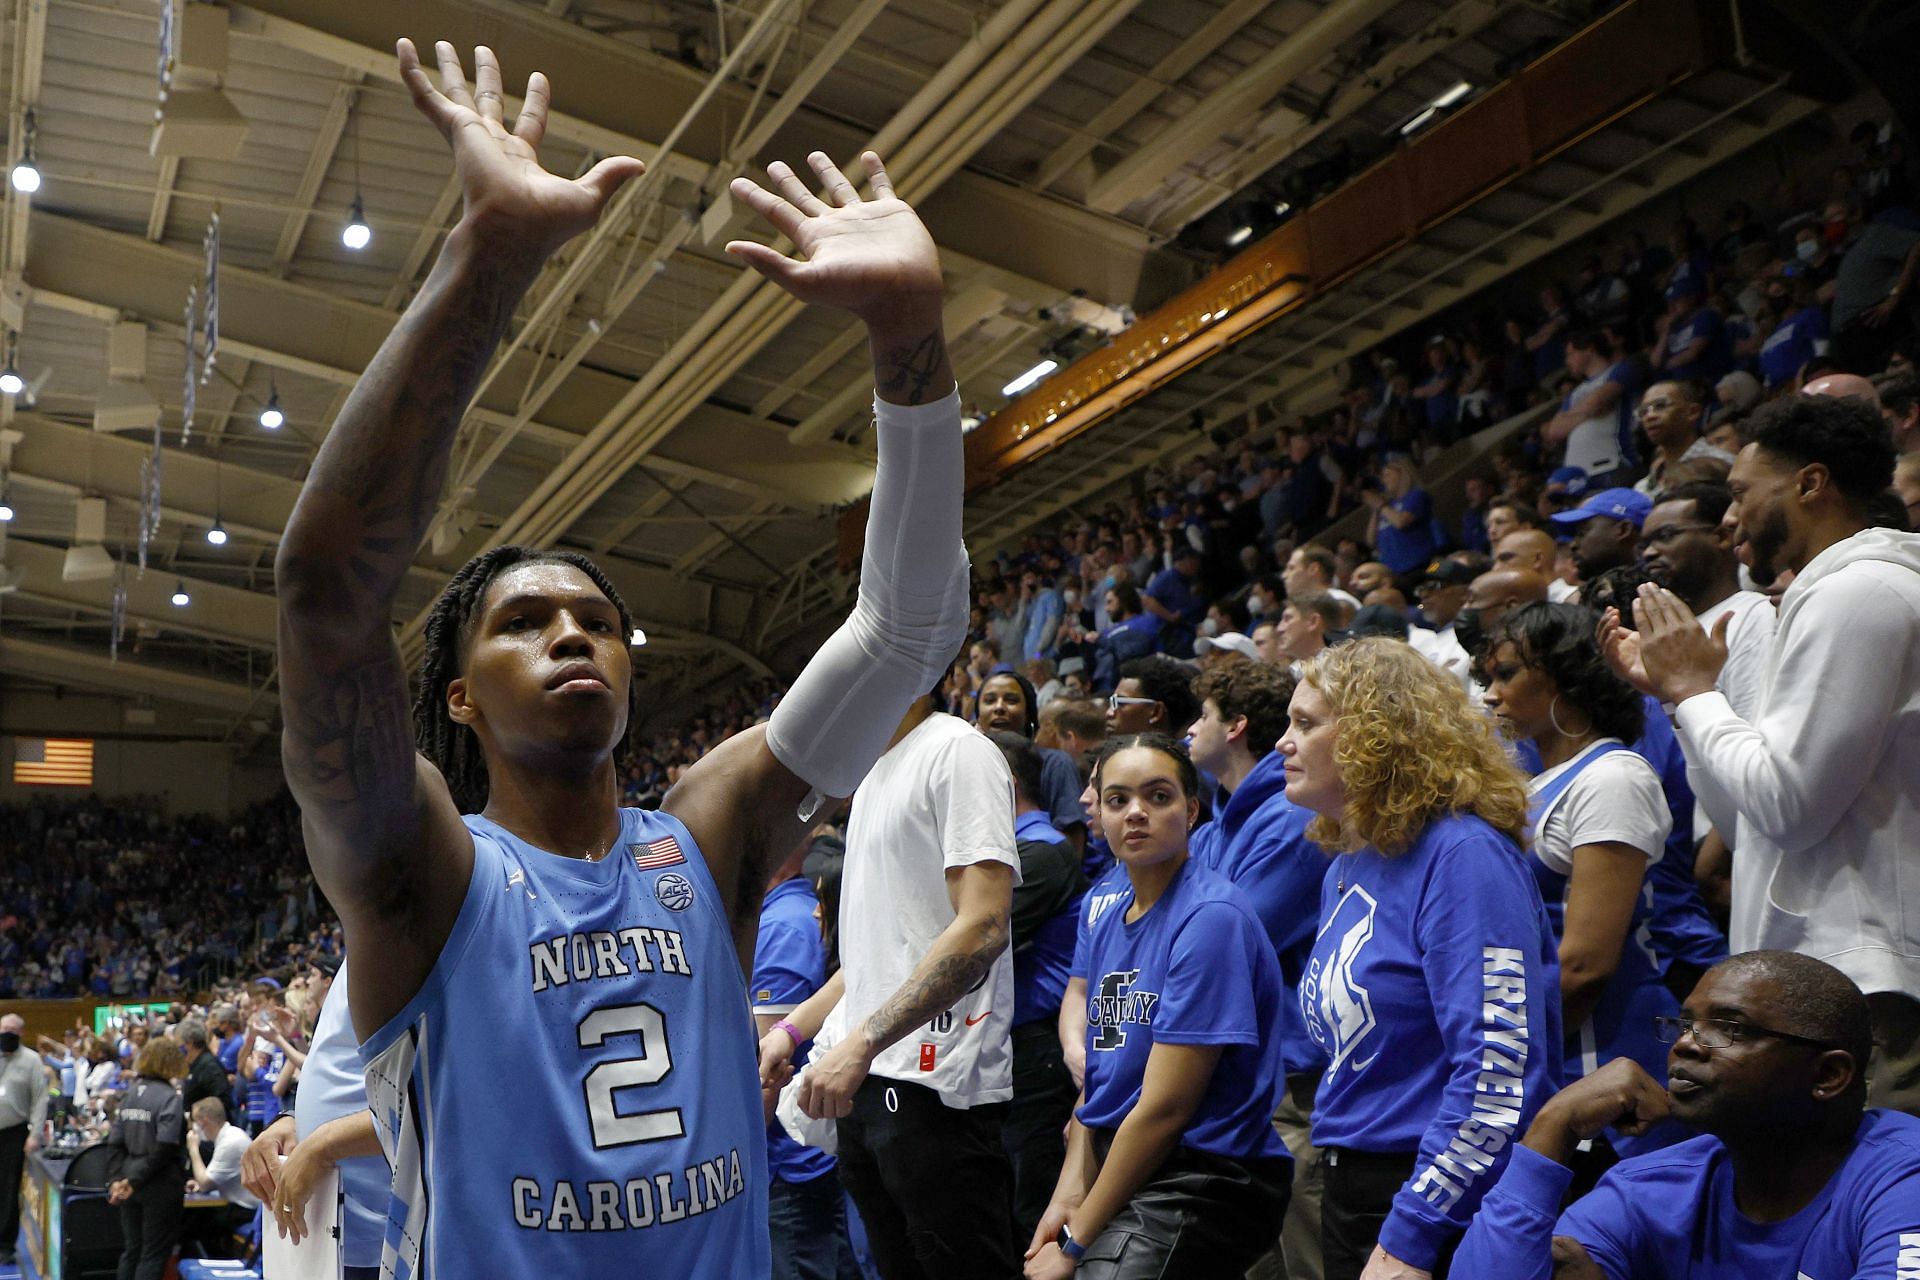 Love is returning to North Carolina for one more run at a national championship.